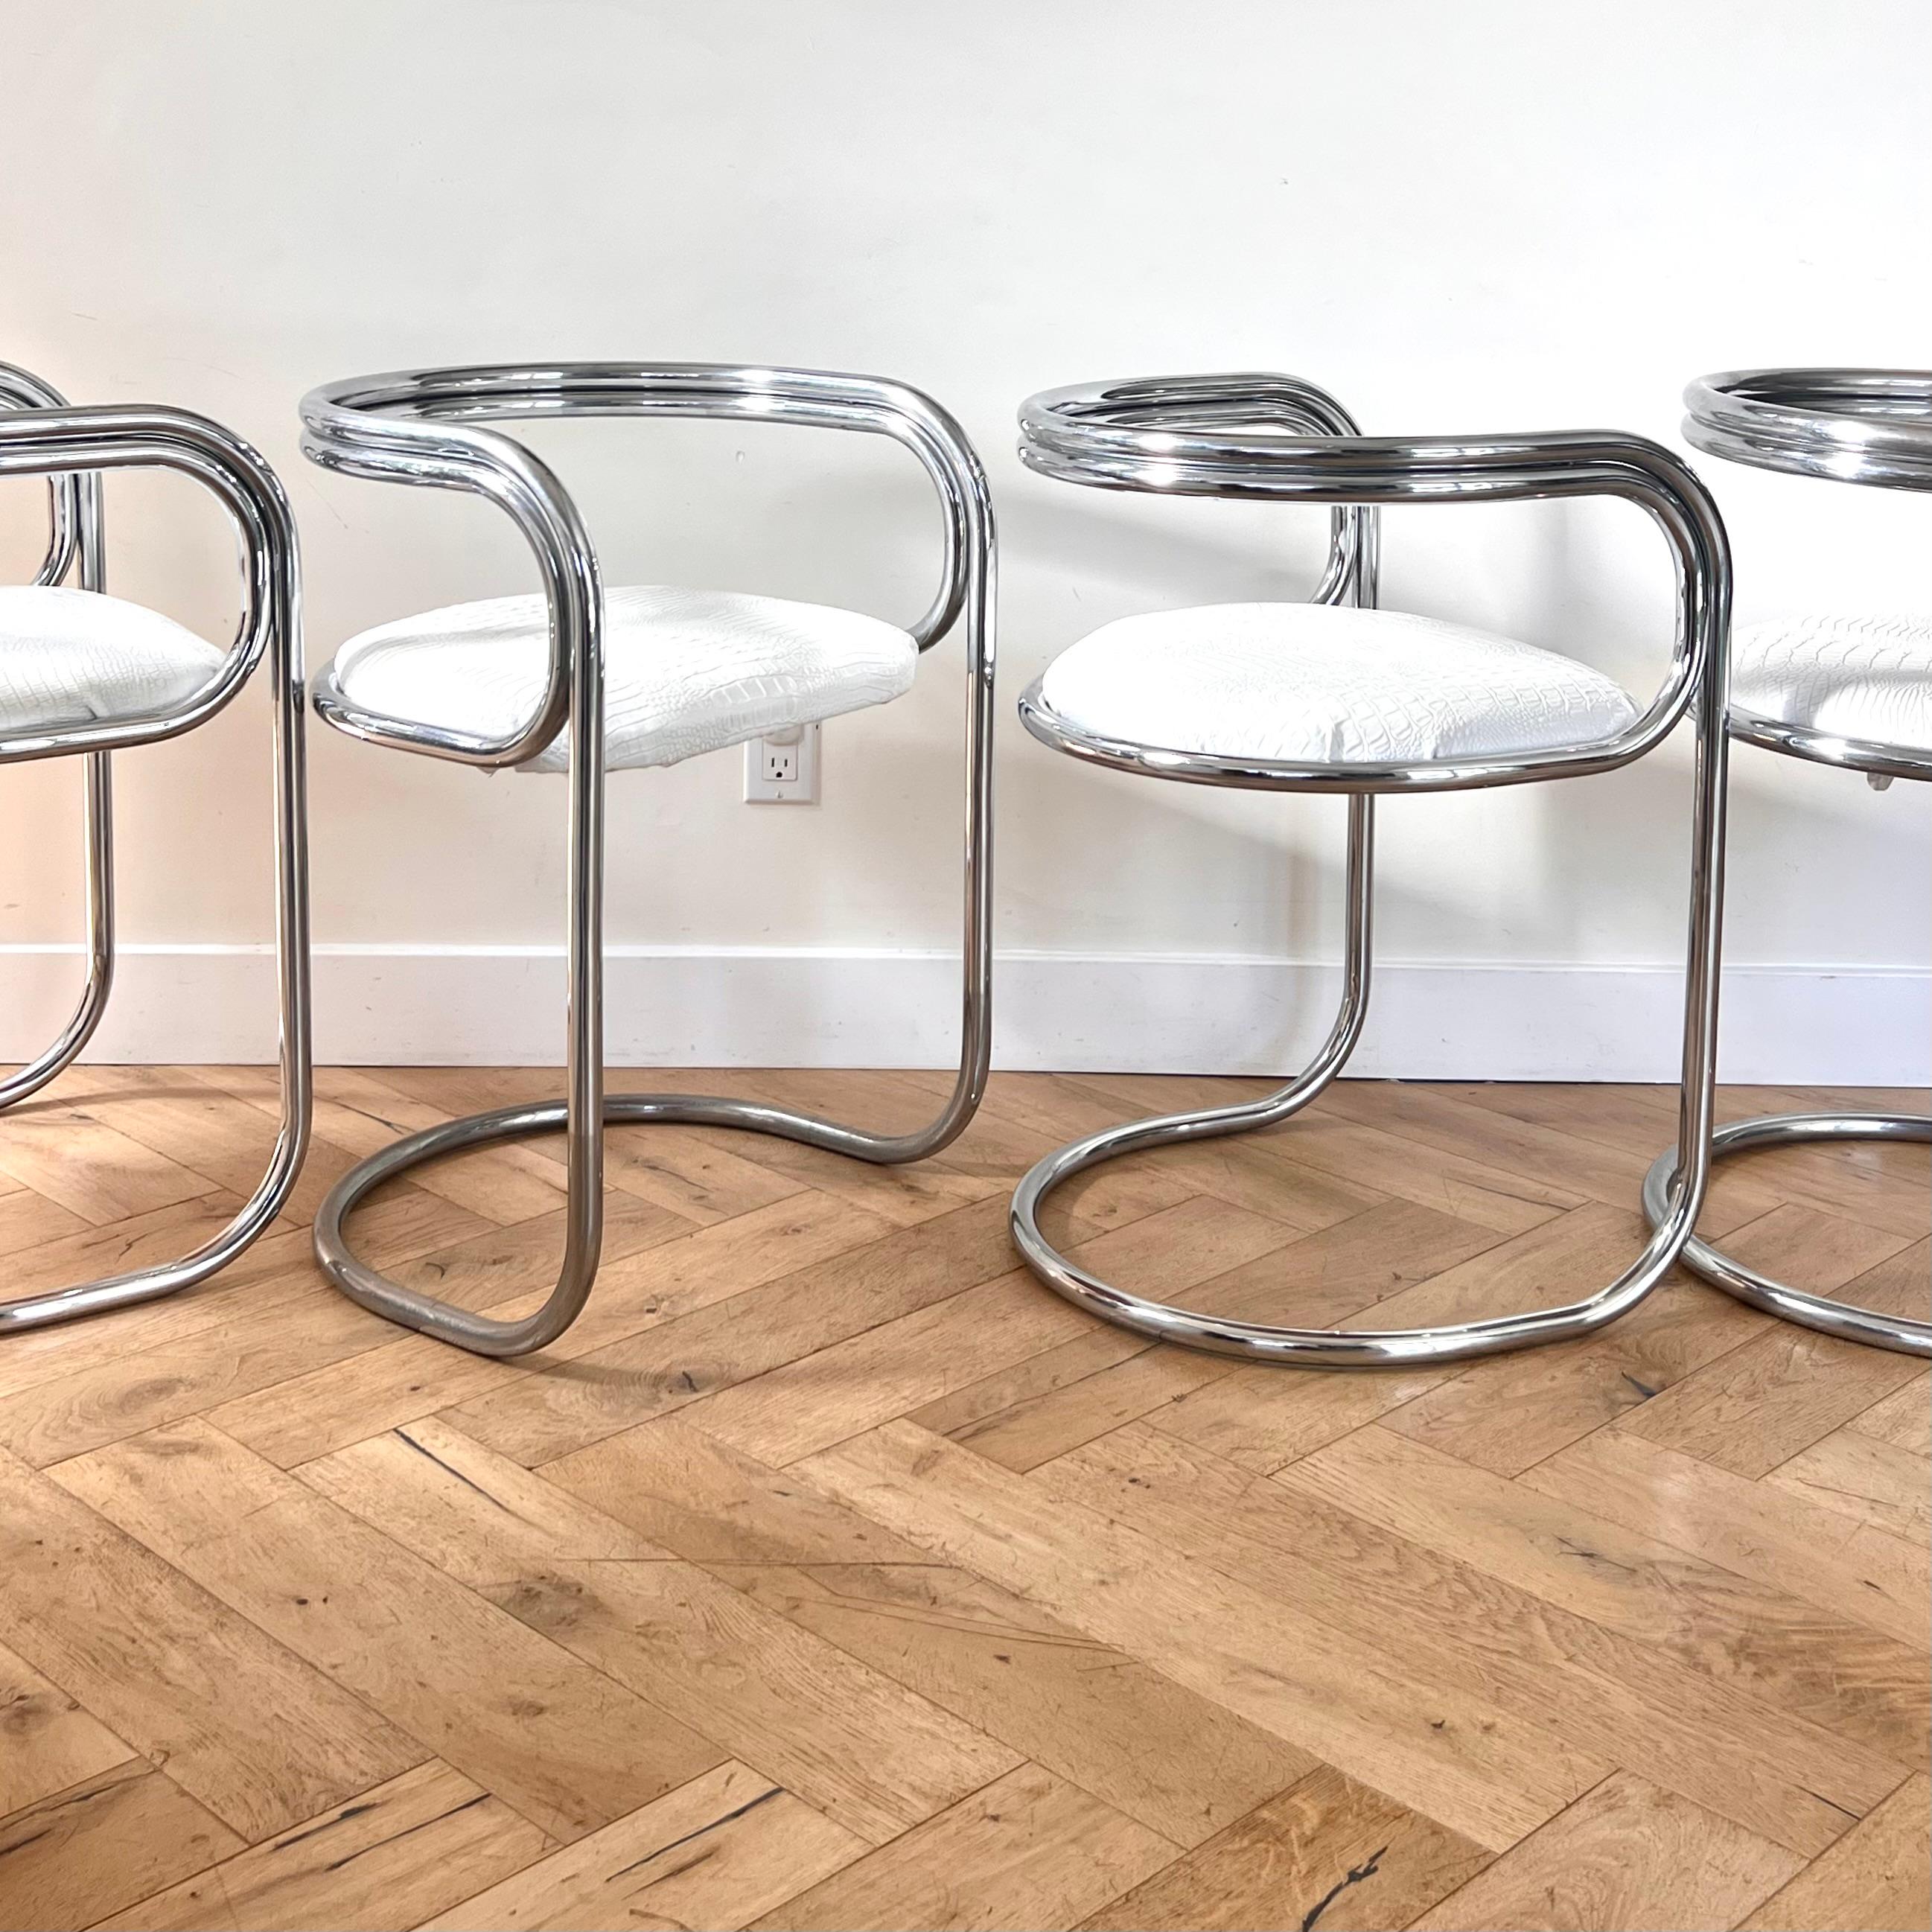 A set of four cantilever chairs designed by Peter Wigglesworth for Plush, circa 1970. In chrome-plated tubular steel and white faux leather upholstery with python motif. Fabulous condition. Pick up in LA or we ship worldwide; please don’t hesitate